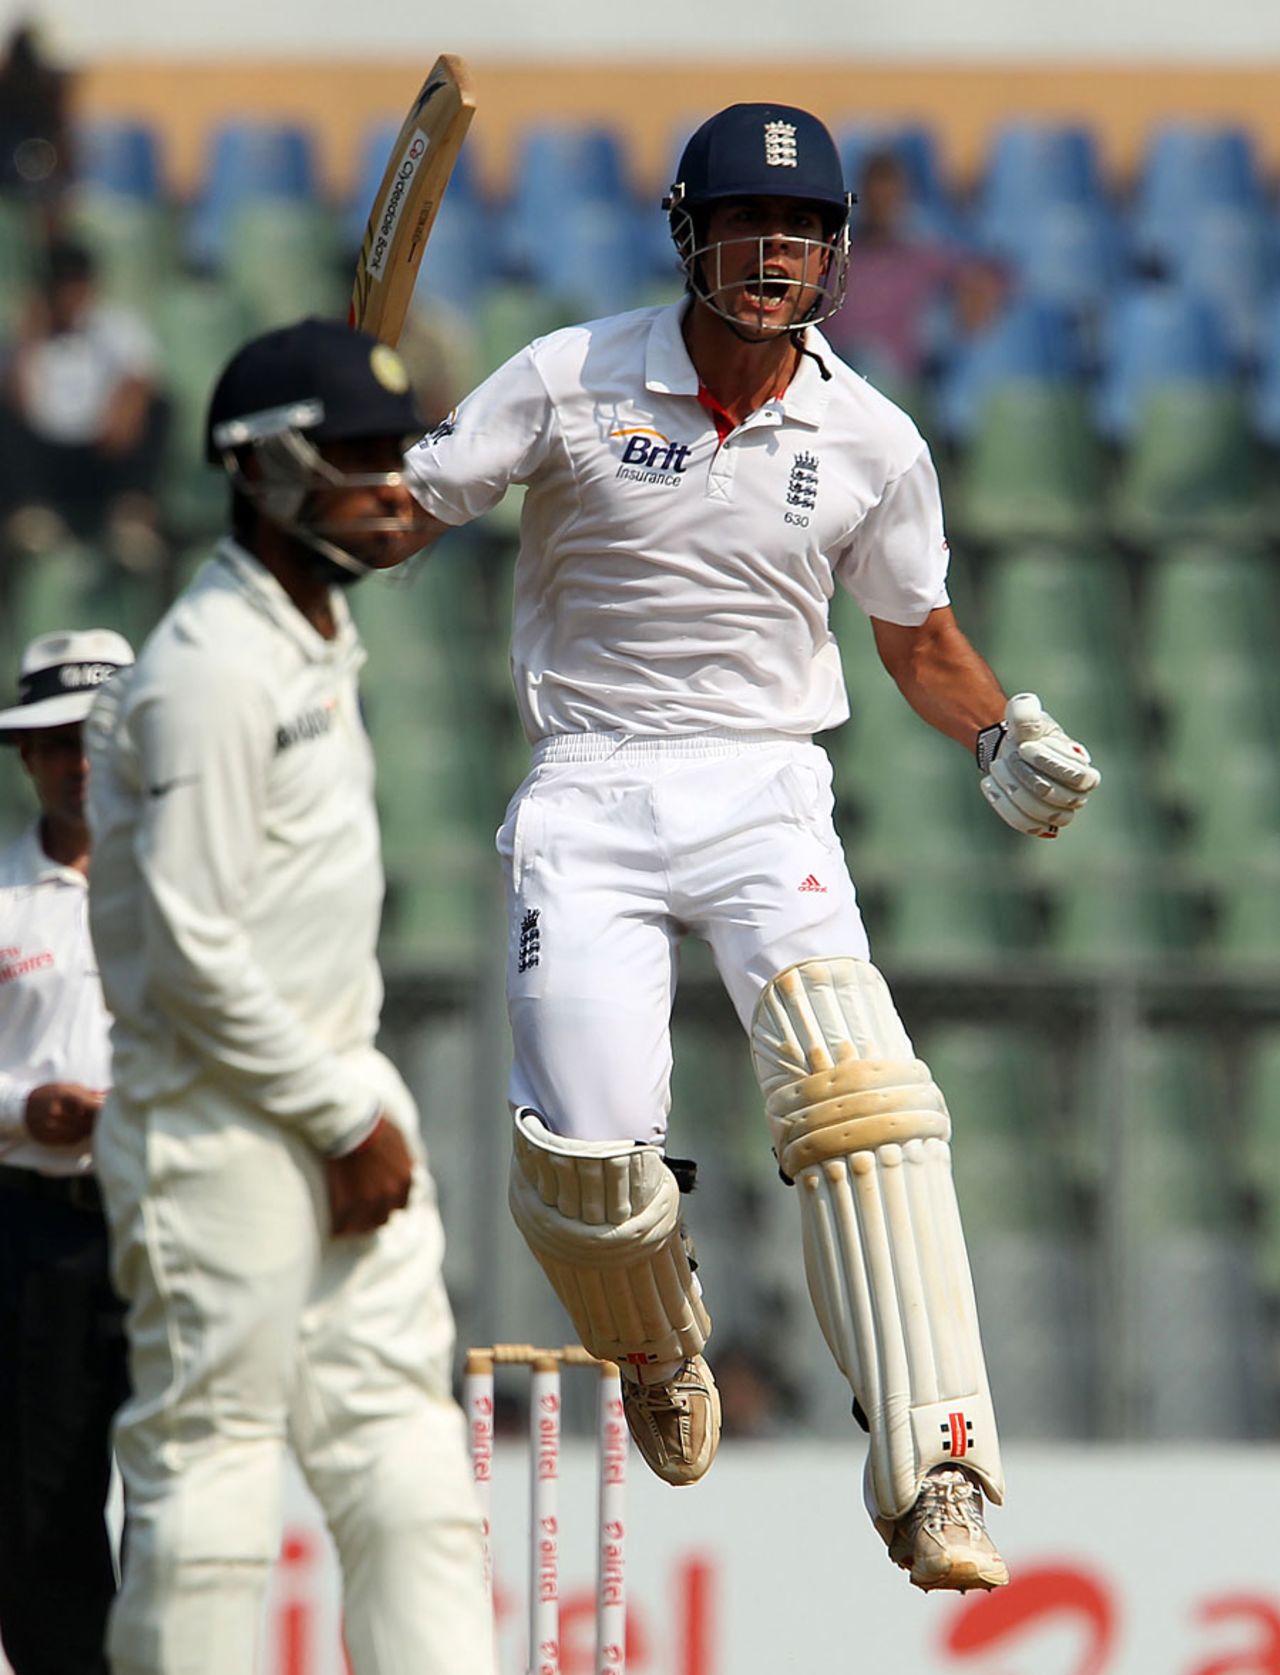 Alastair Cook leaps as the winning runs are scored, India v England, 2nd Test, Mumbai, 4th day, November 26, 2012